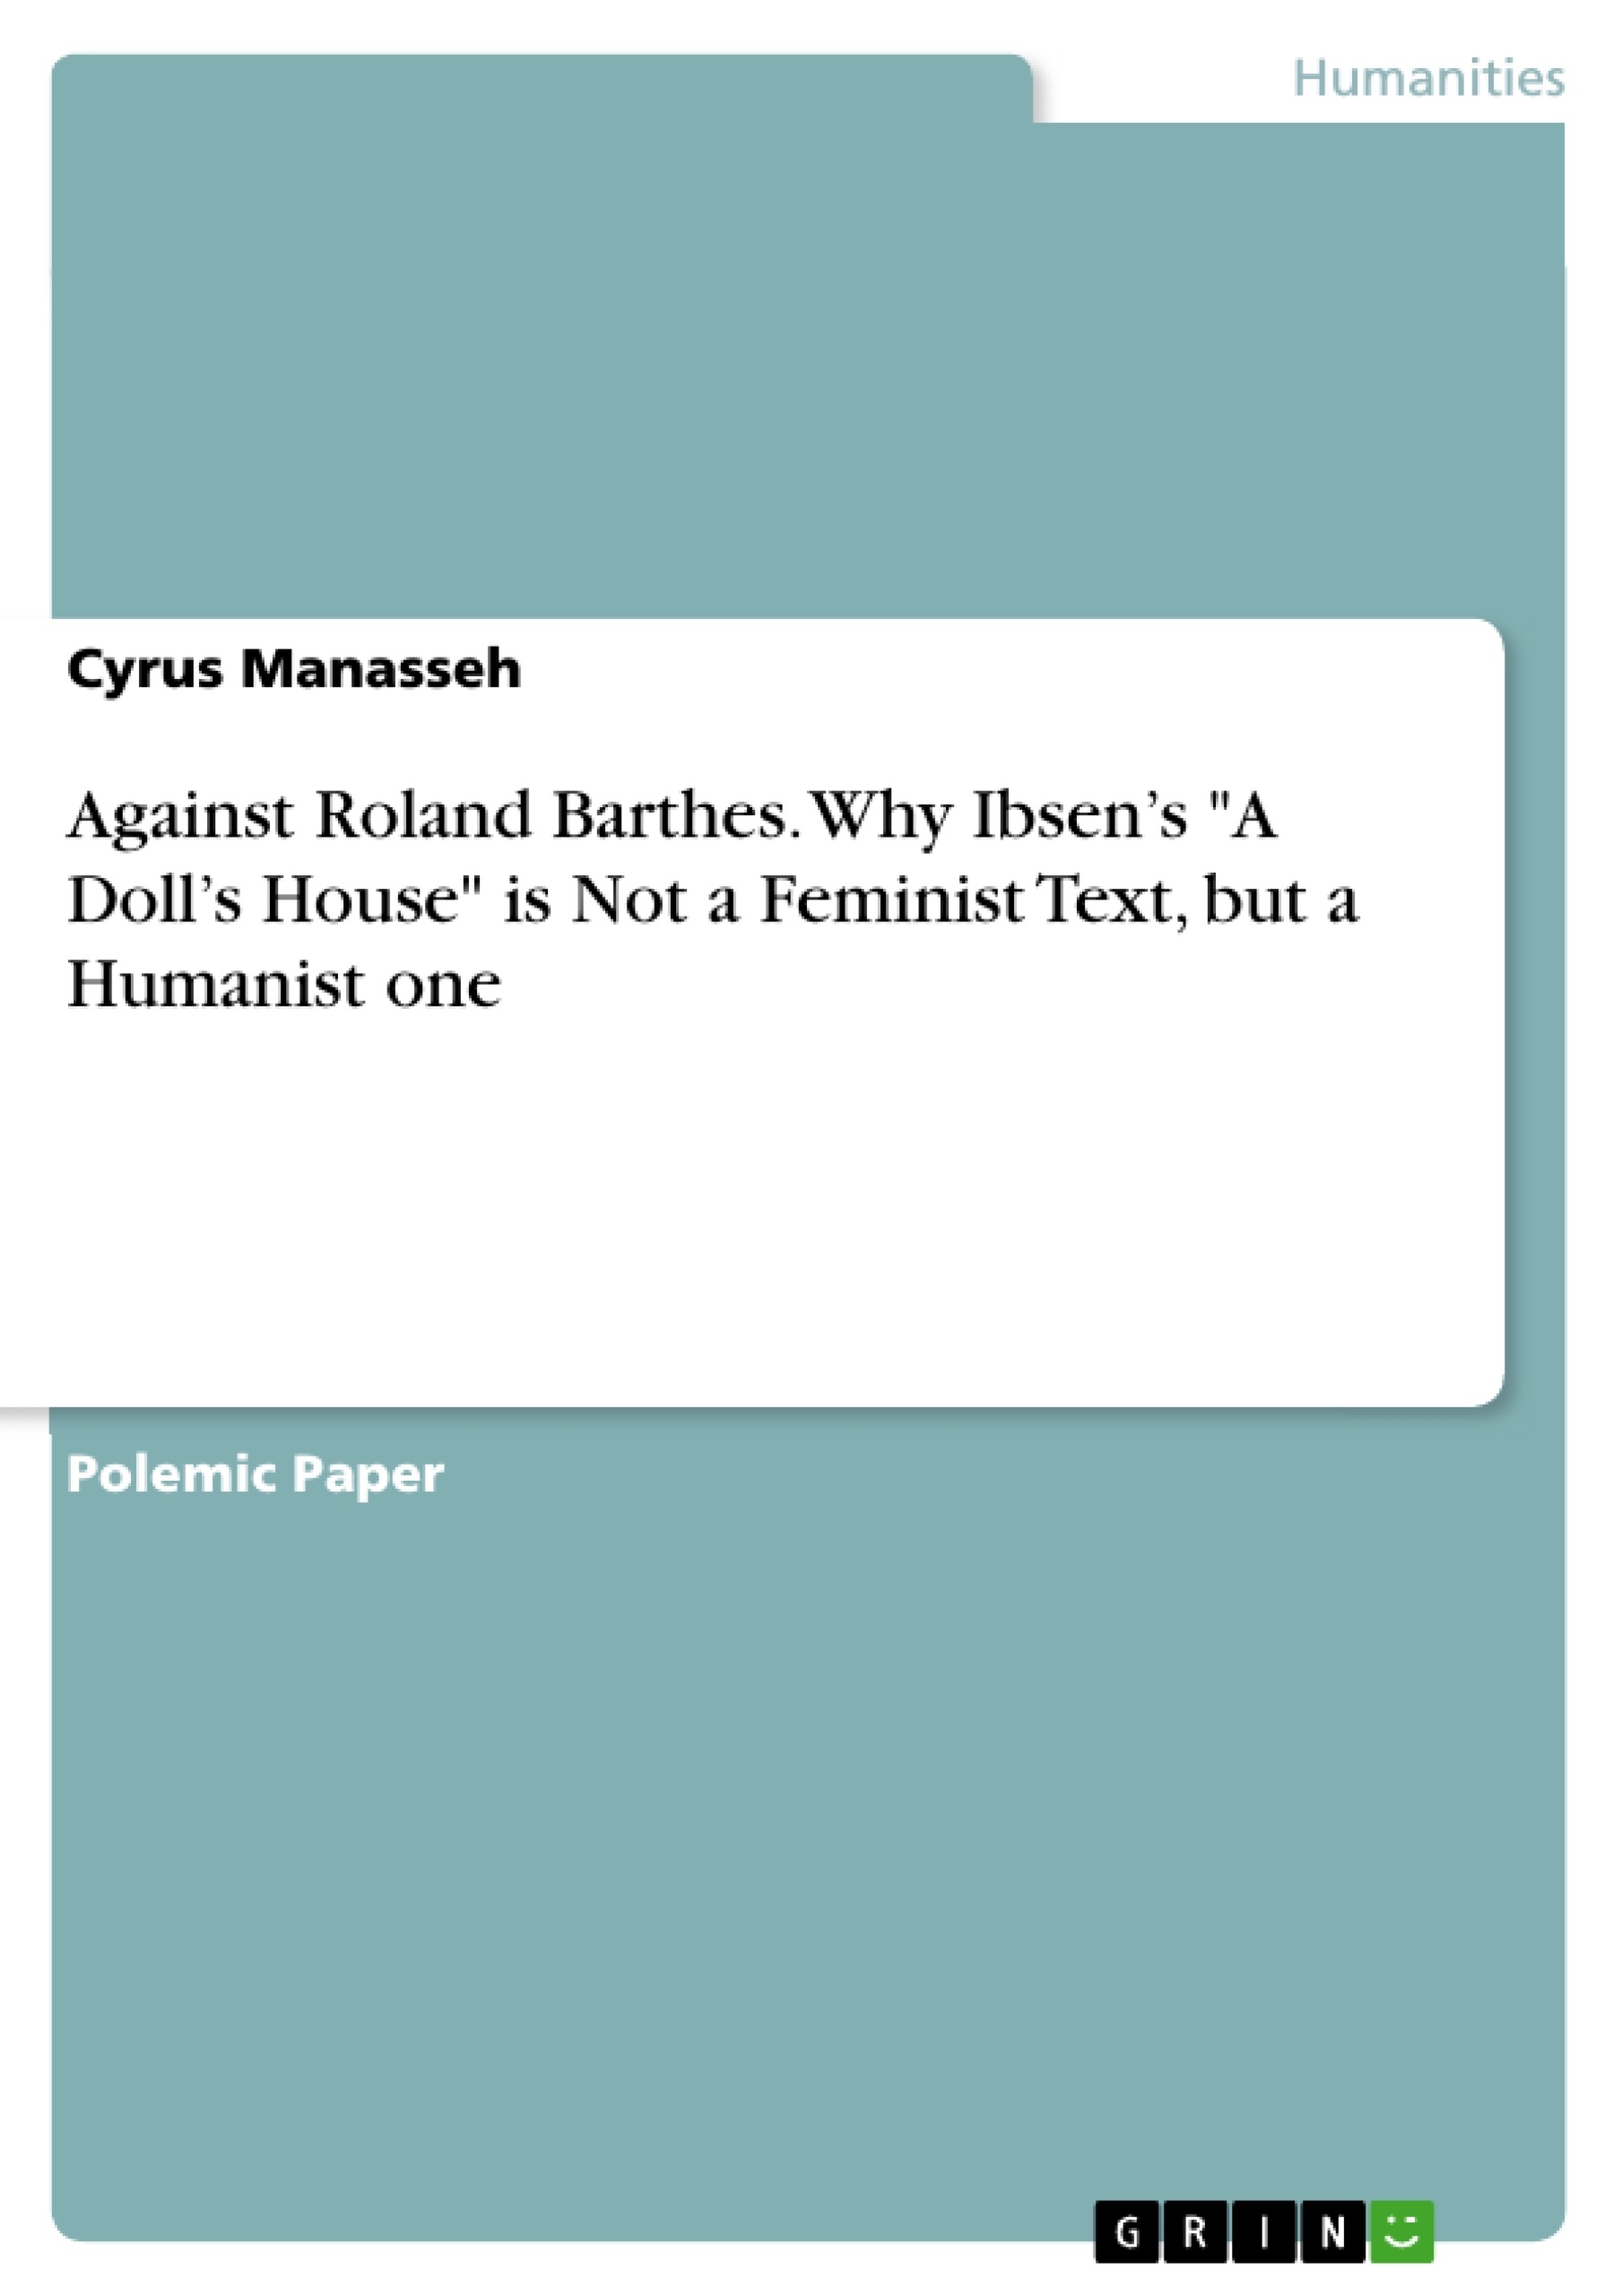 Titre: Against Roland Barthes. Why Ibsen’s "A Doll’s House" is Not a Feminist Text, but a Humanist one